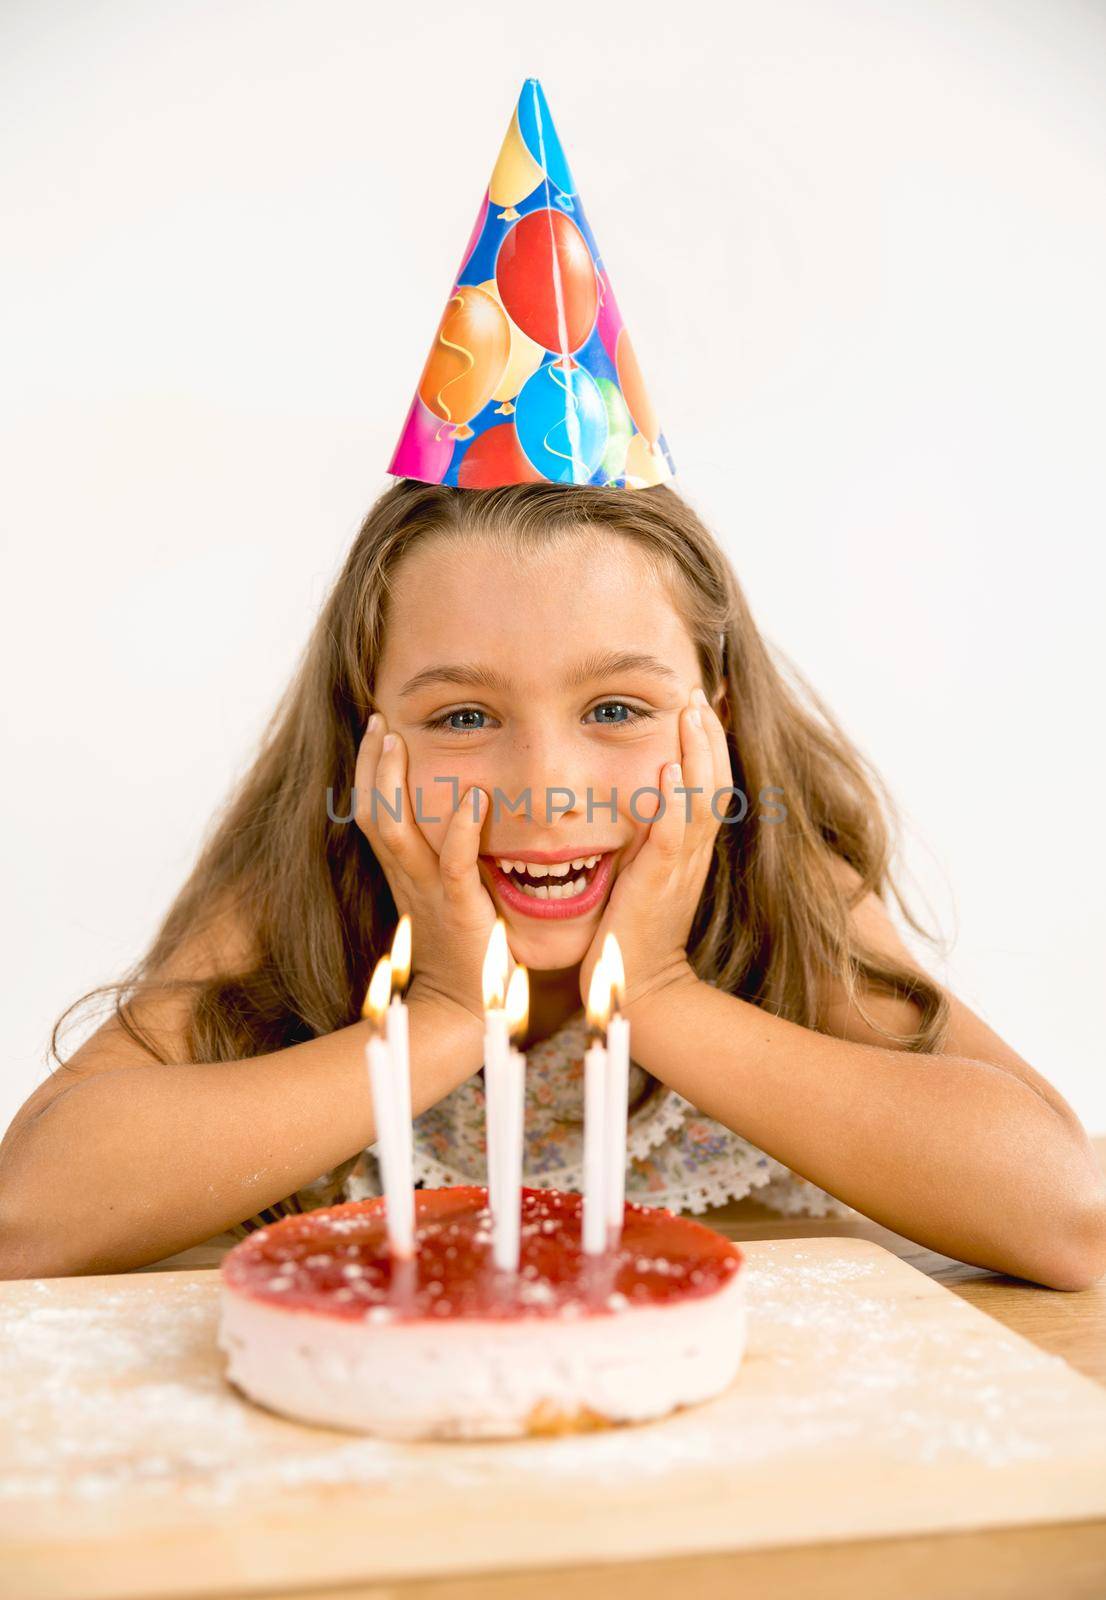 Shot of a happy young girl celebrating her birthday9